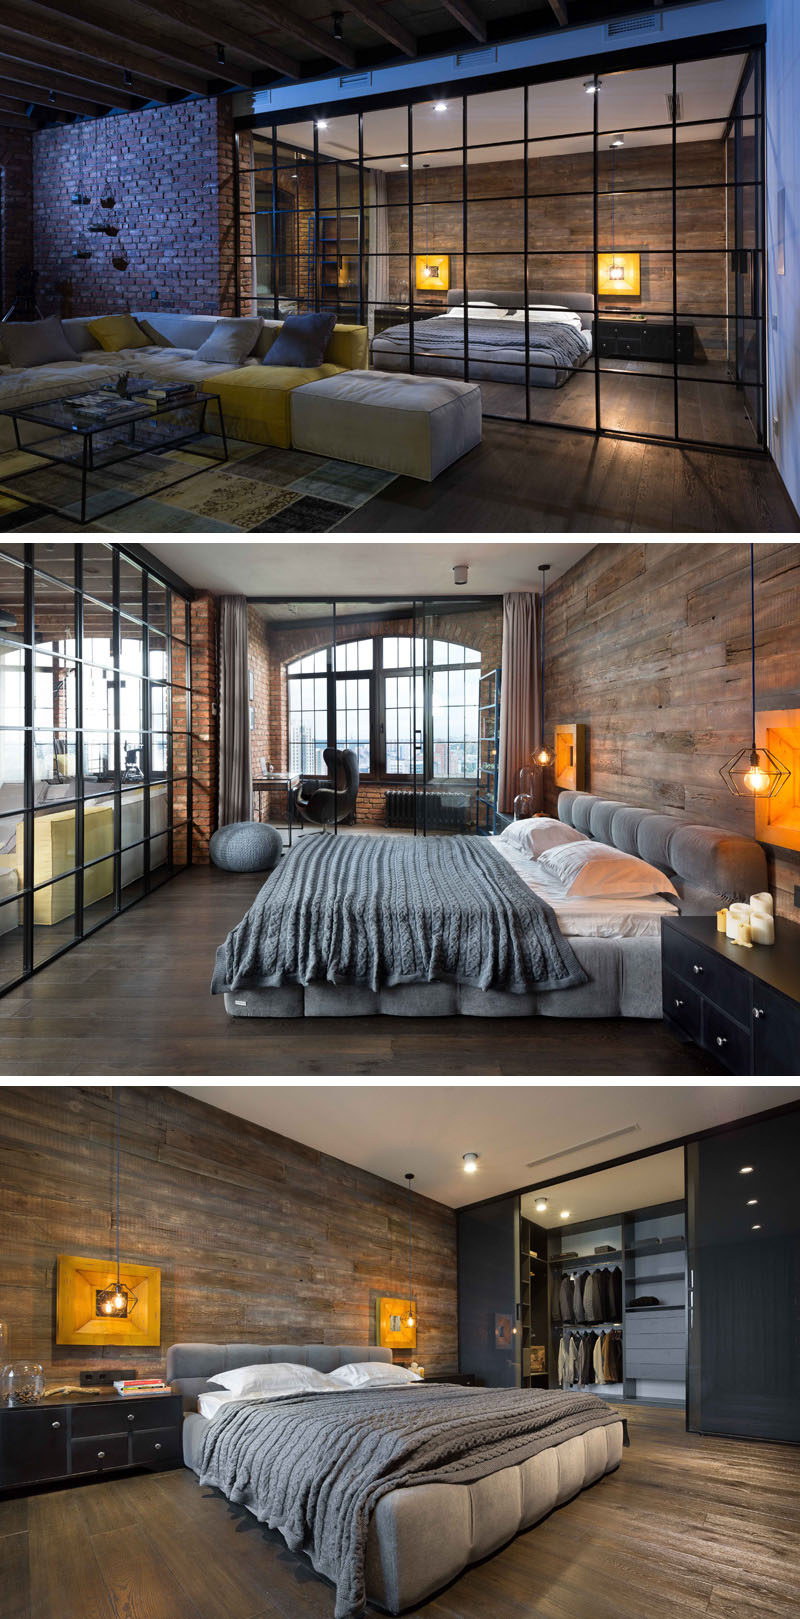 This loft apartment features a large bedroom that's separated from the living area by glass wall.